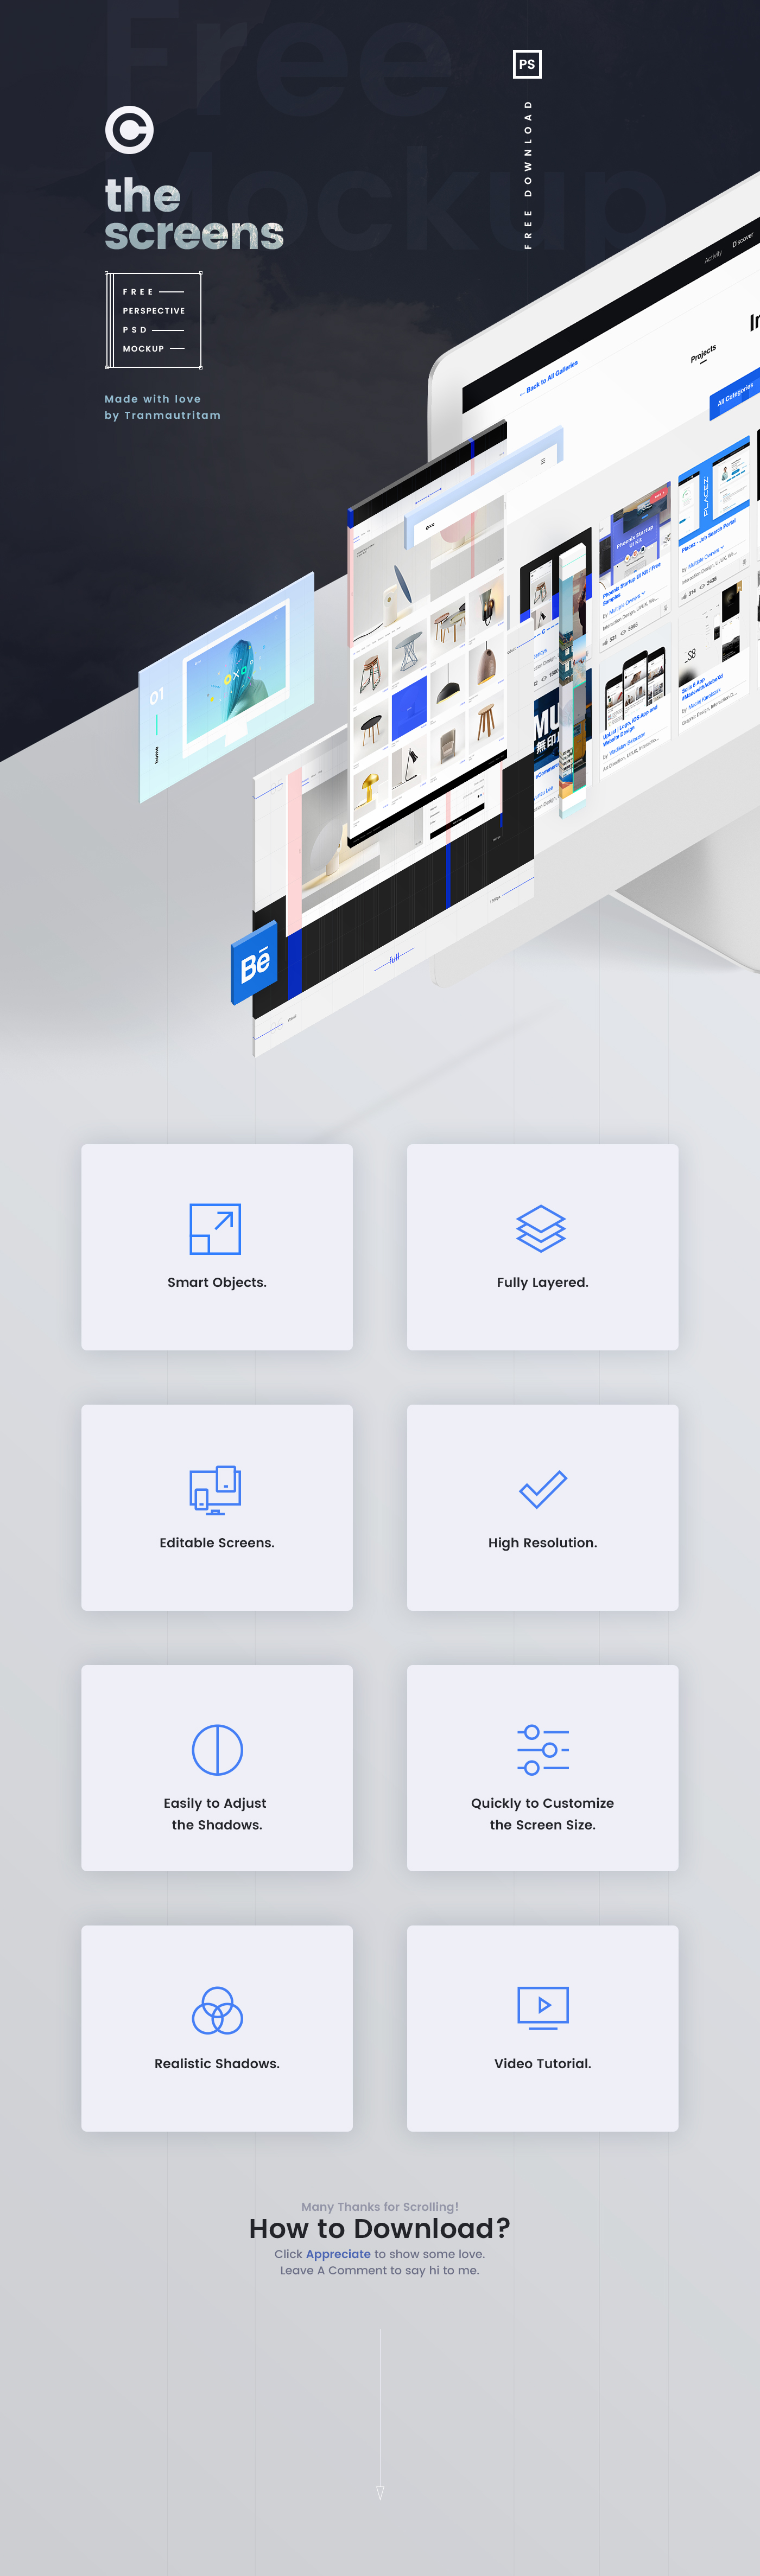 Download The Screens Free Perspective Psd Mockup Template On Behance PSD Mockup Templates